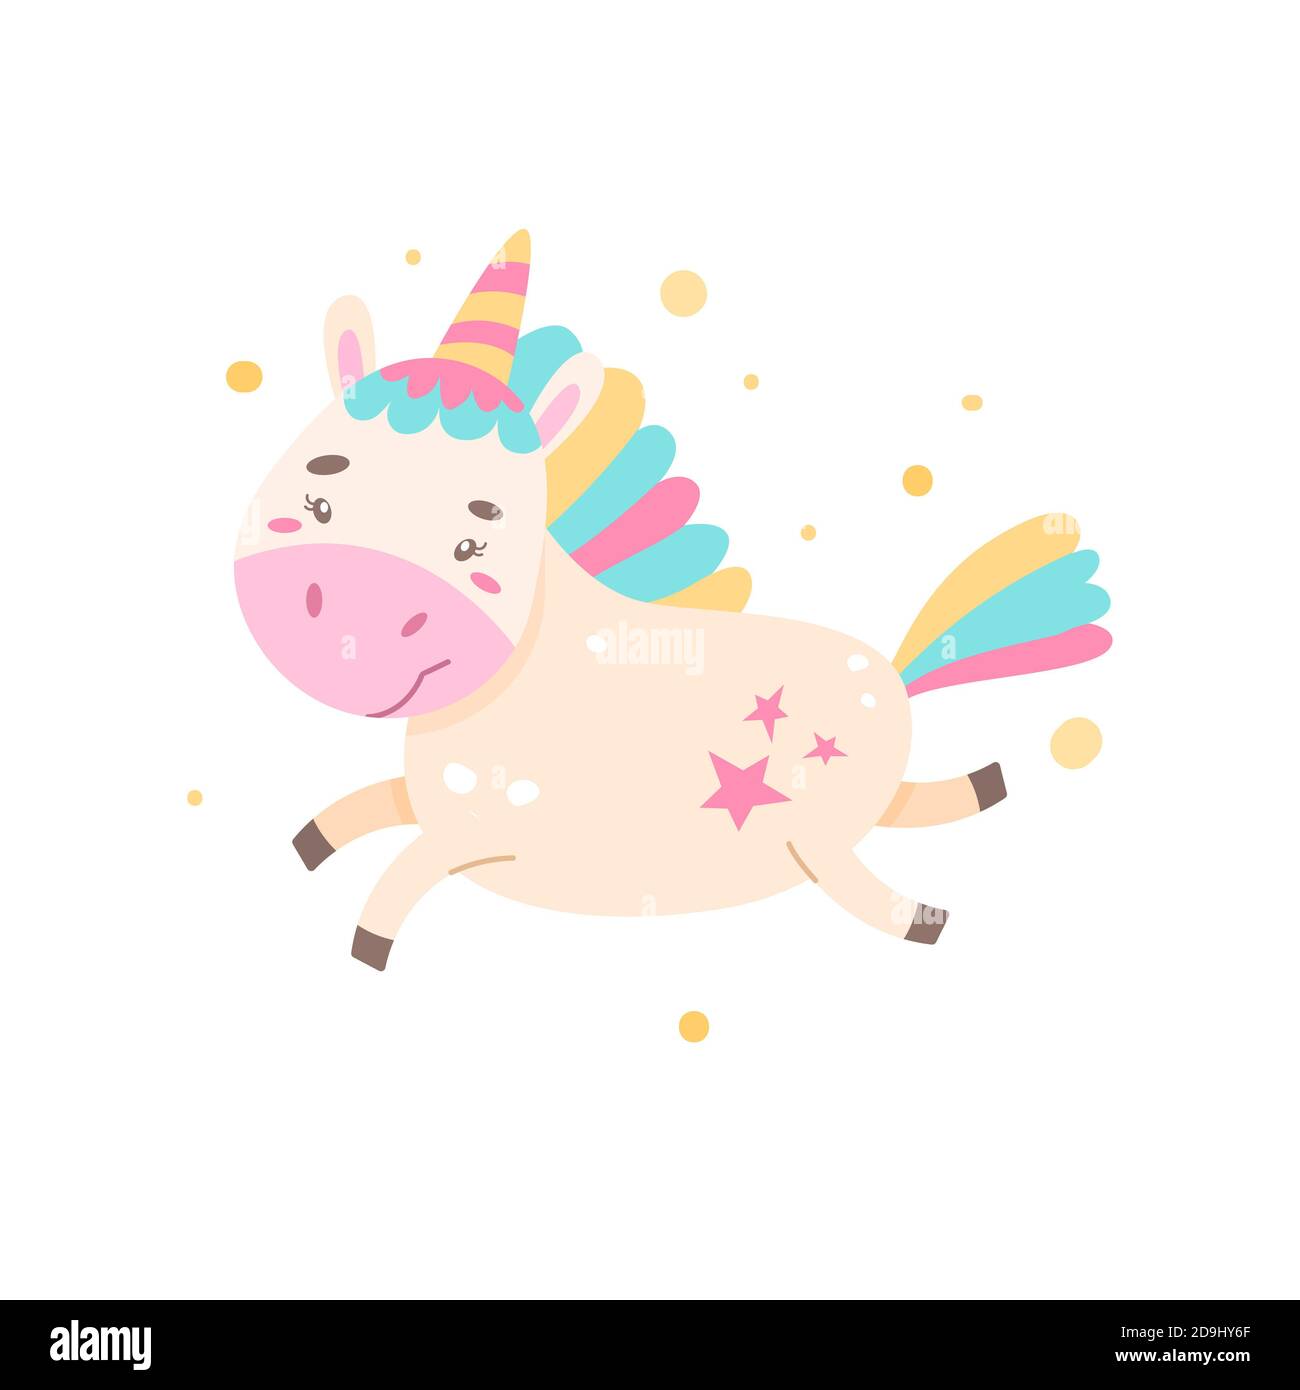 Cheerful rainbow unicorn is running. Simple illustration on an isolated background. Can be used as a design for stationery, clothing prints. Stock Photo